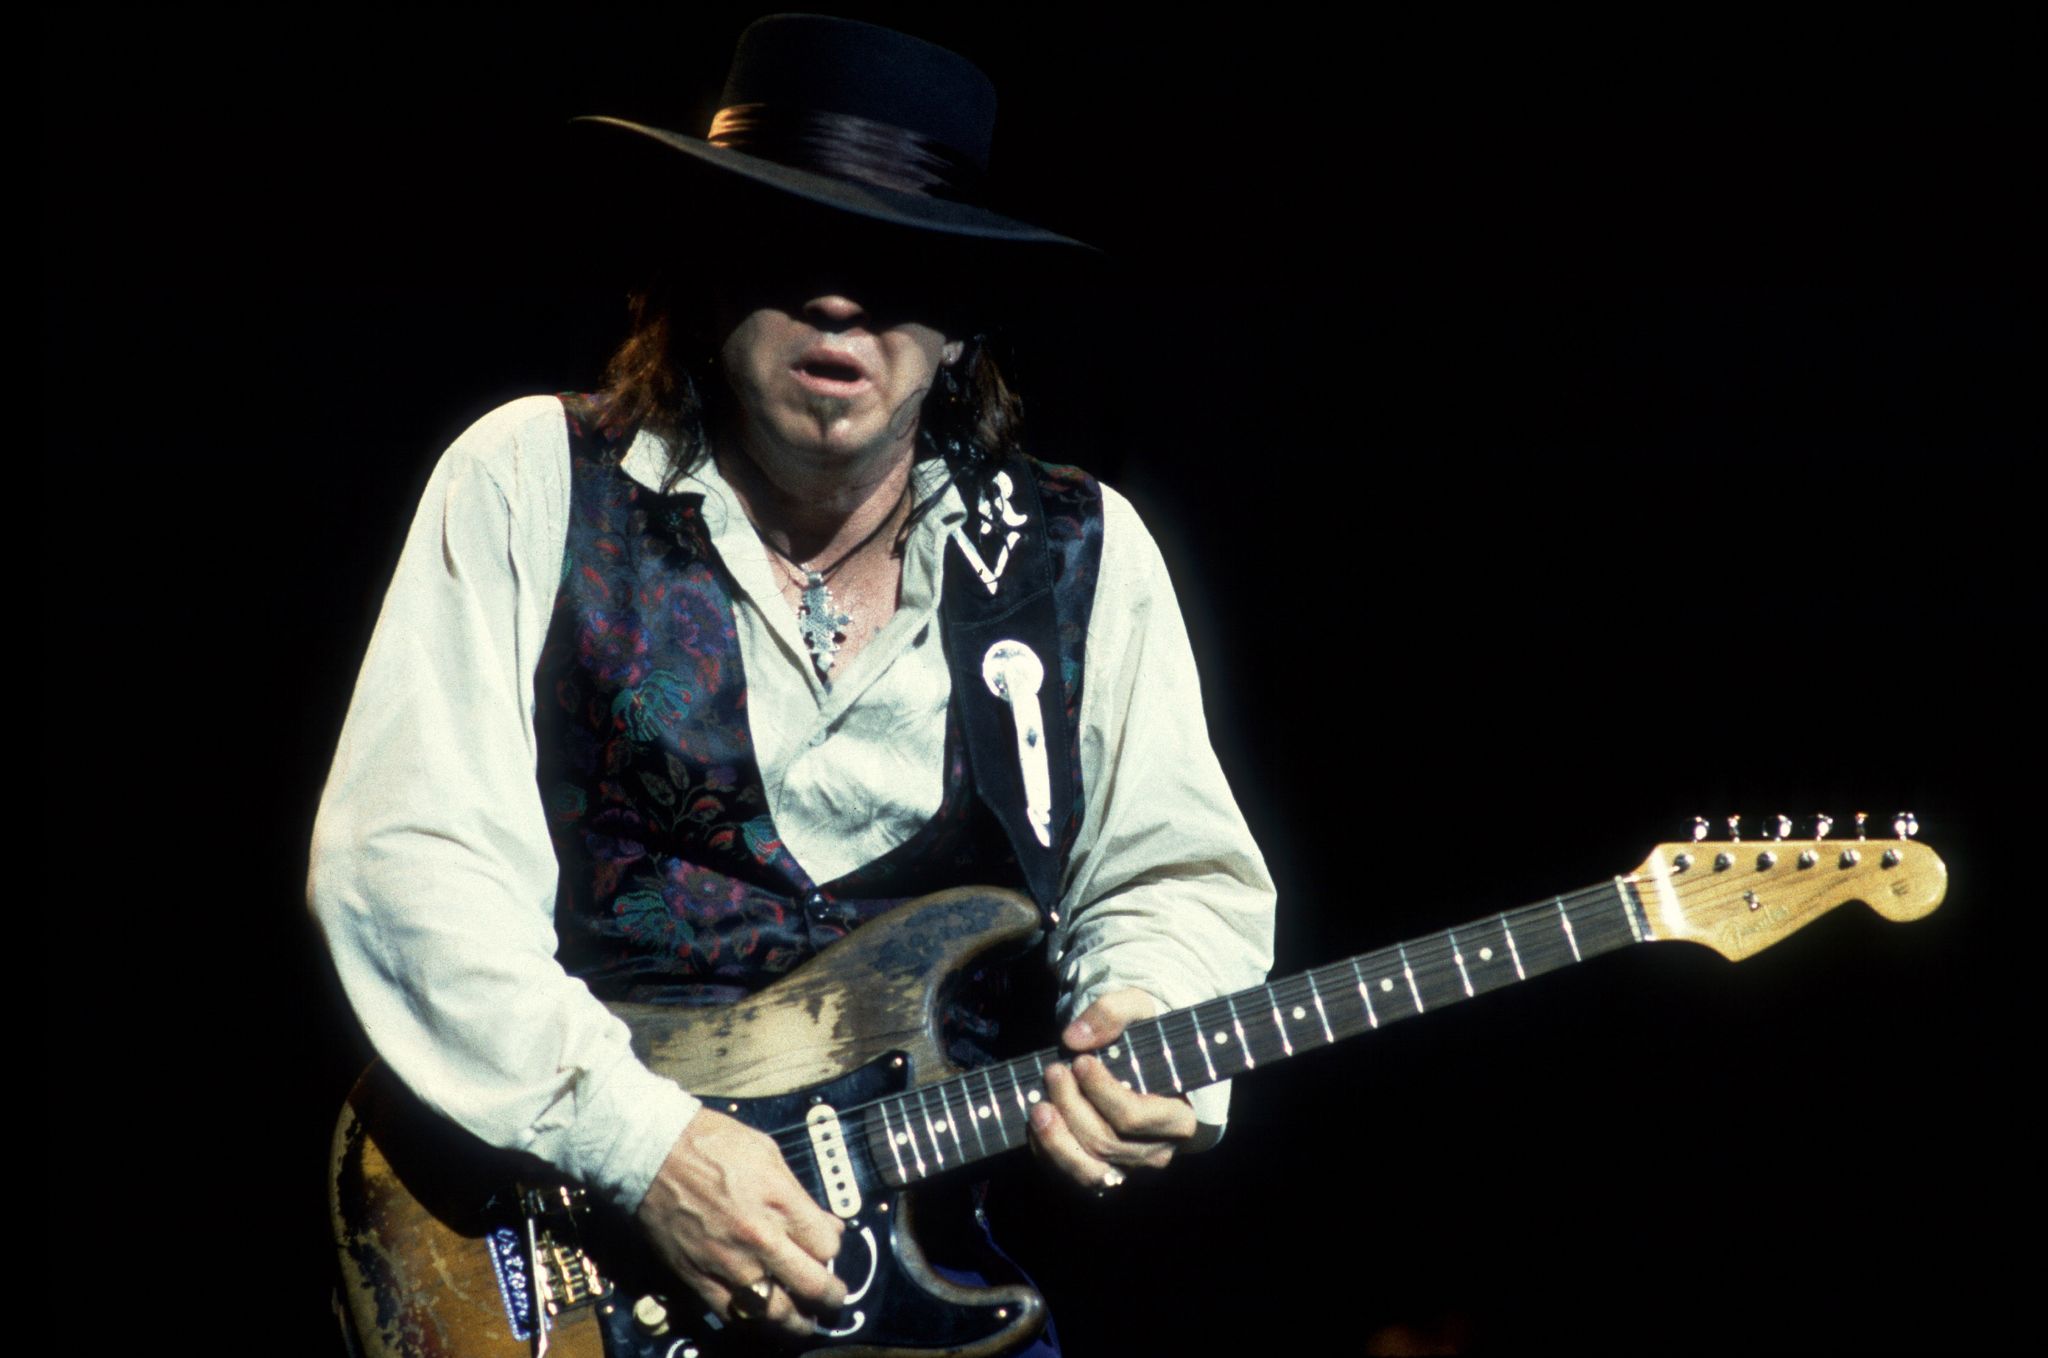 Stevie Ray Vaughan statue in Austin defaced by graffiti taggers